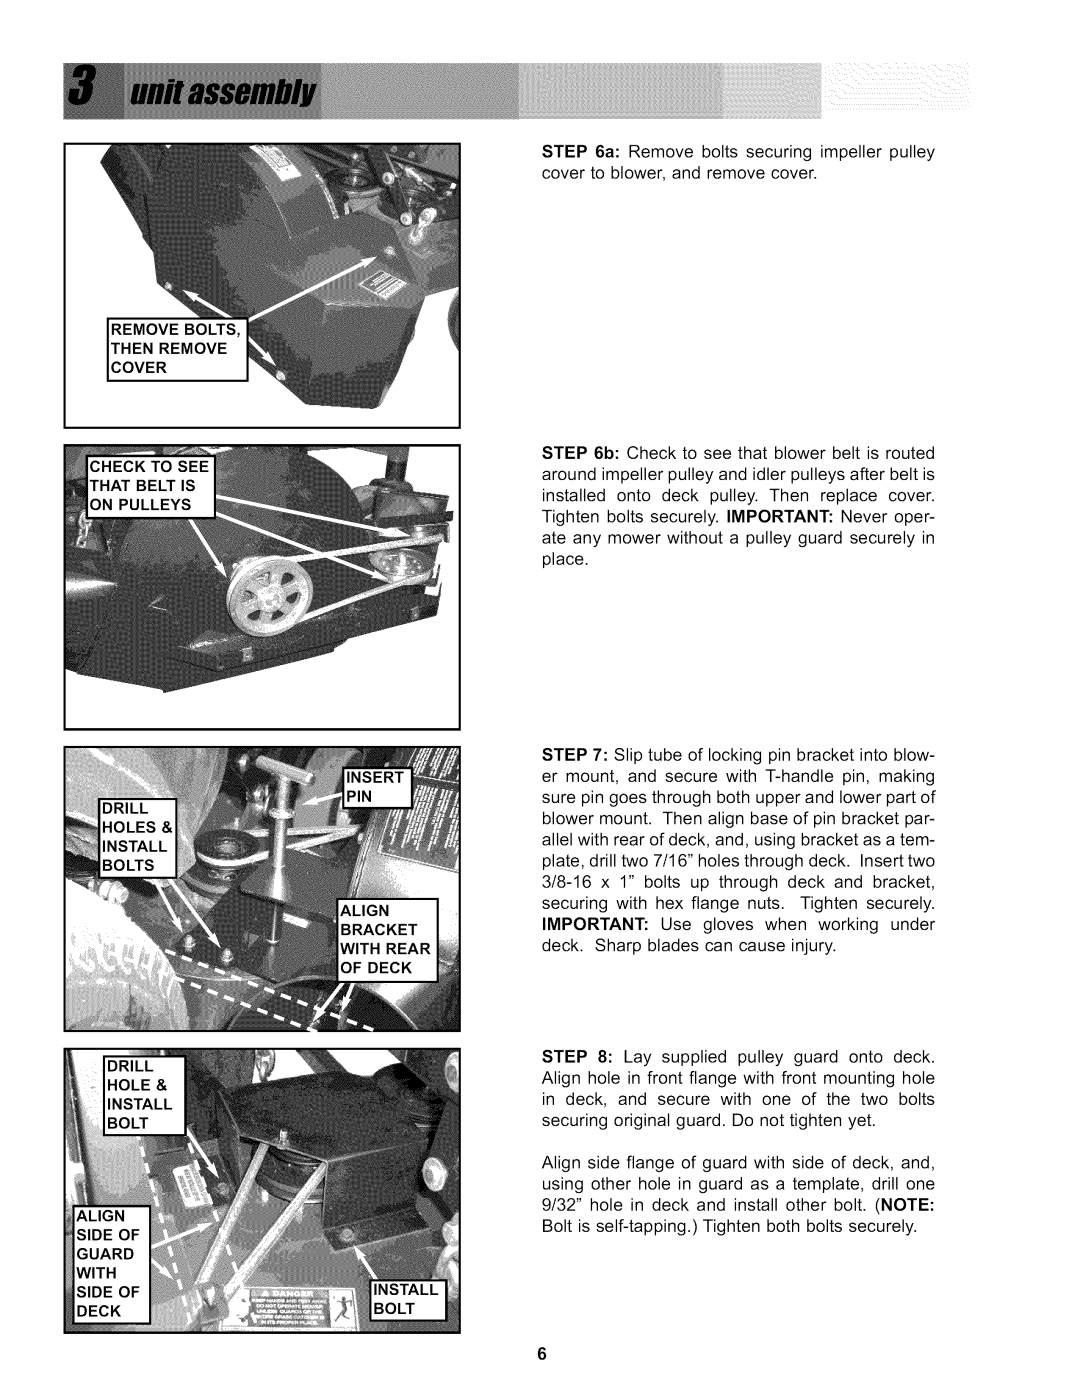 Snapper P/N 7078273, 0-50576 manual a Remove bolts securing impeller pulley cover to blower, and remove cover 